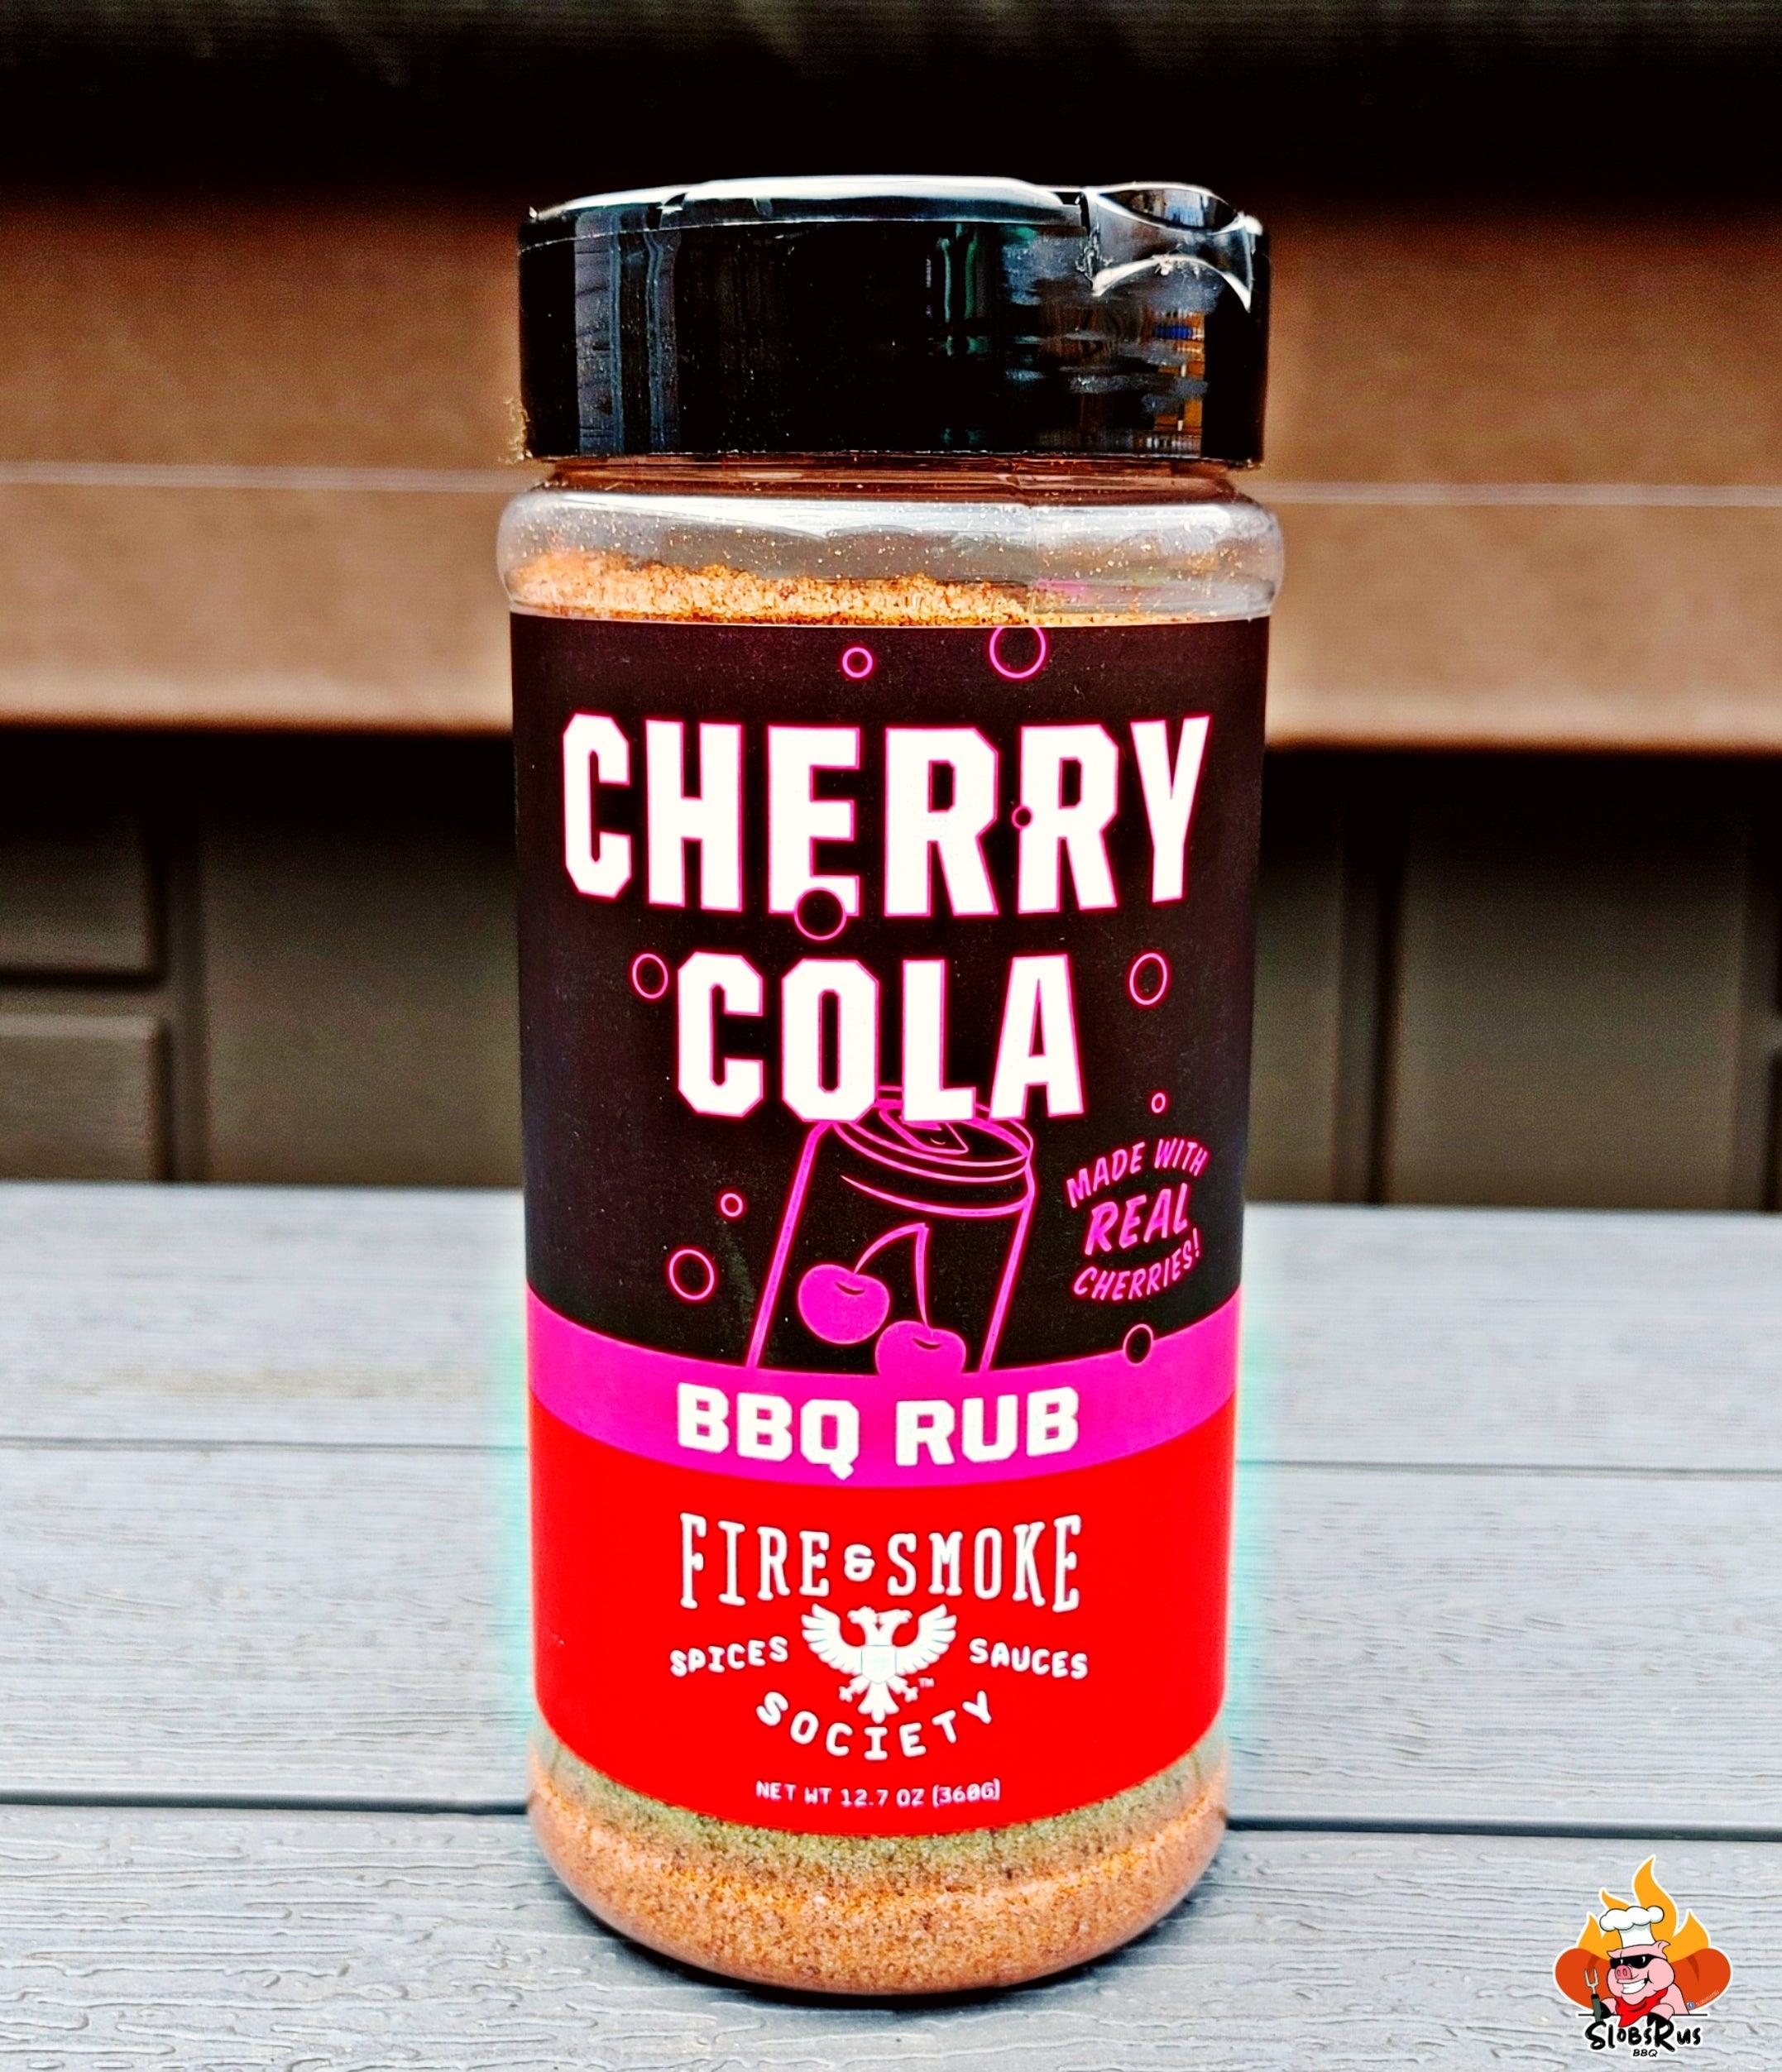 Fire & Smoke Society Cherry Cola BBQ Dry Rub Seasoning for Smoking and  Grilling Meat, Beef, Steak, Turkey, Chicken, Lamb, Pork Ribs, Chops,  Barbecue